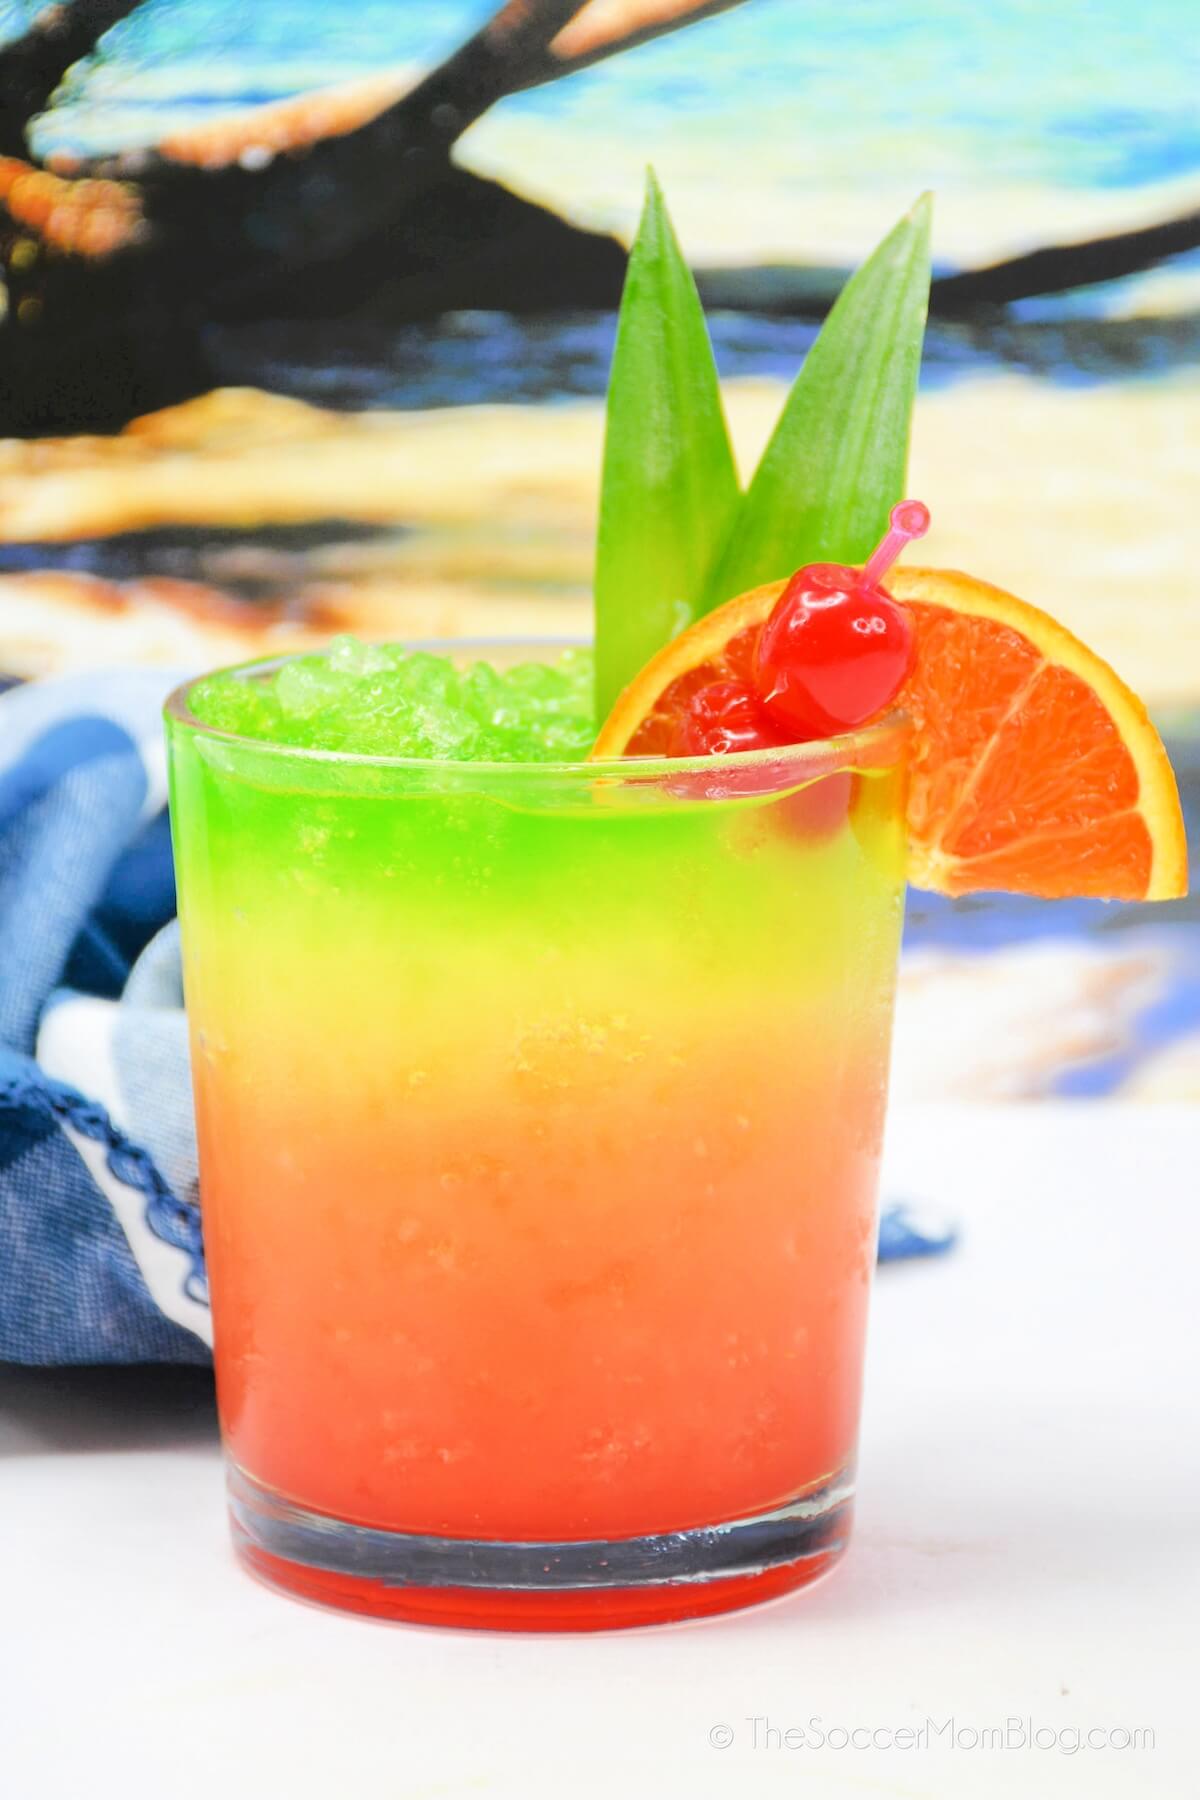 layered Bob Marley drink in tropical colors